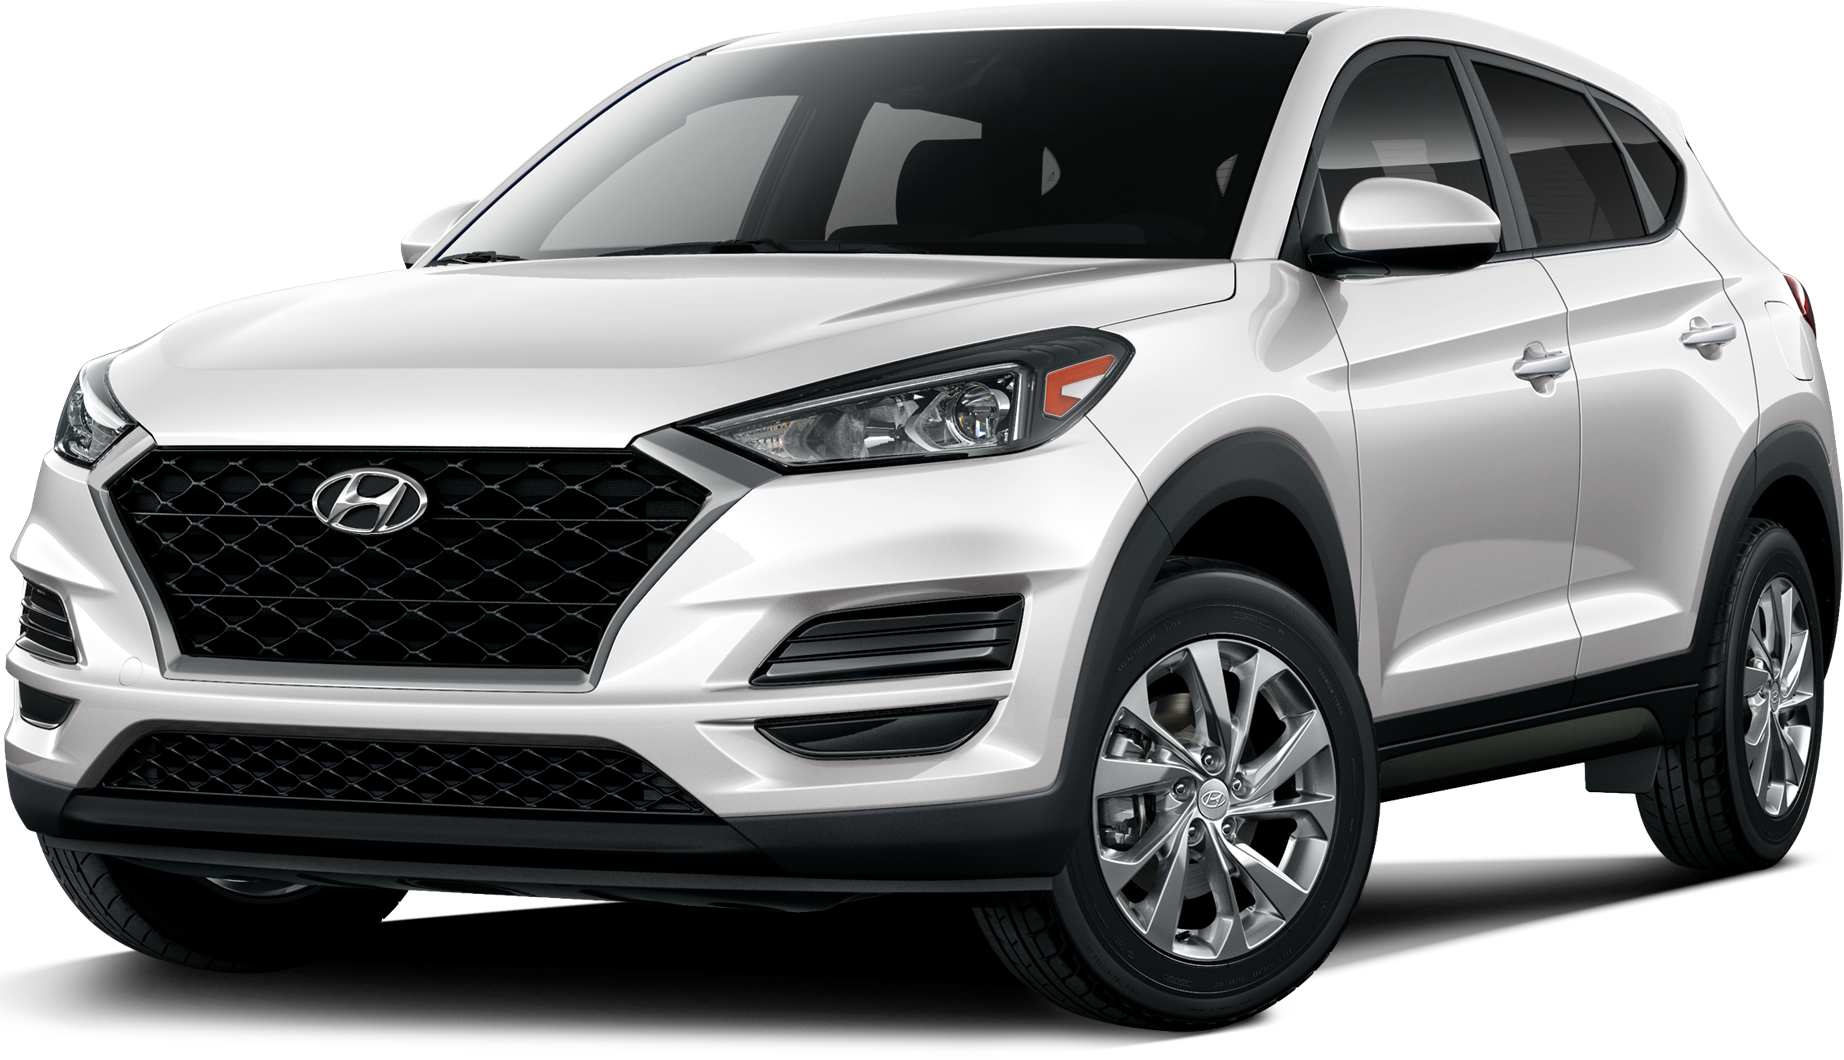 2020 Hyundai Tucson Incentives, Specials & Offers in Thousand Oaks CA